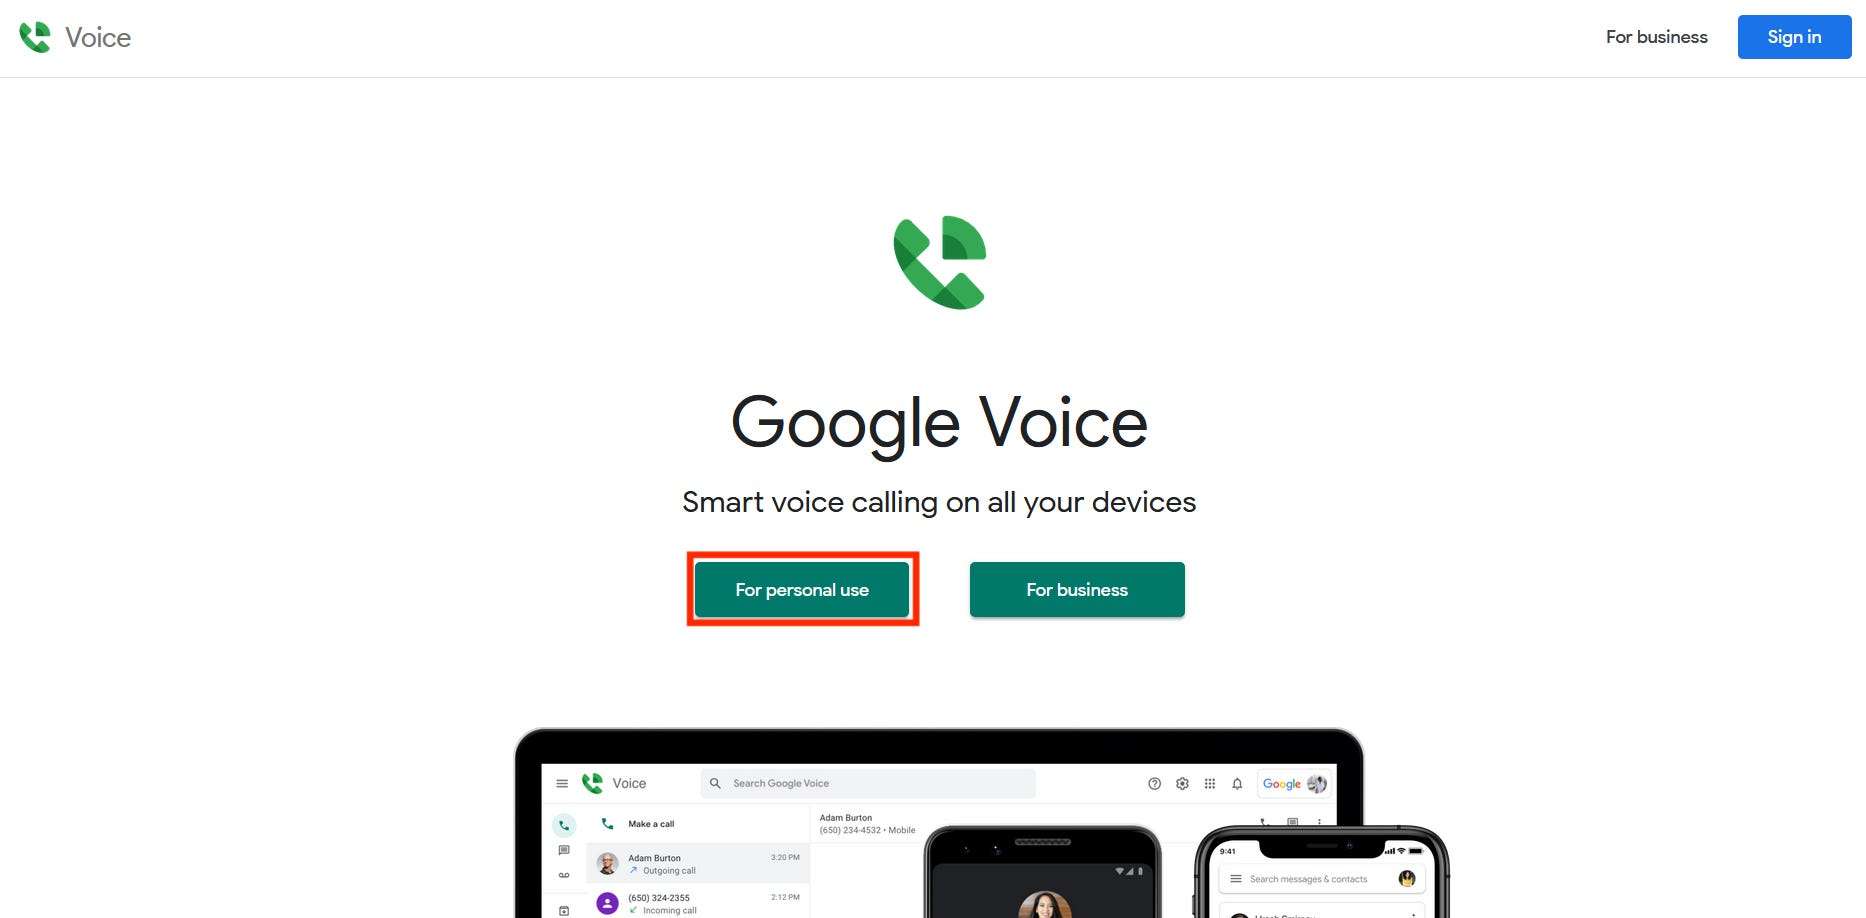 How to send text from a web browser using Google Voice or an email service